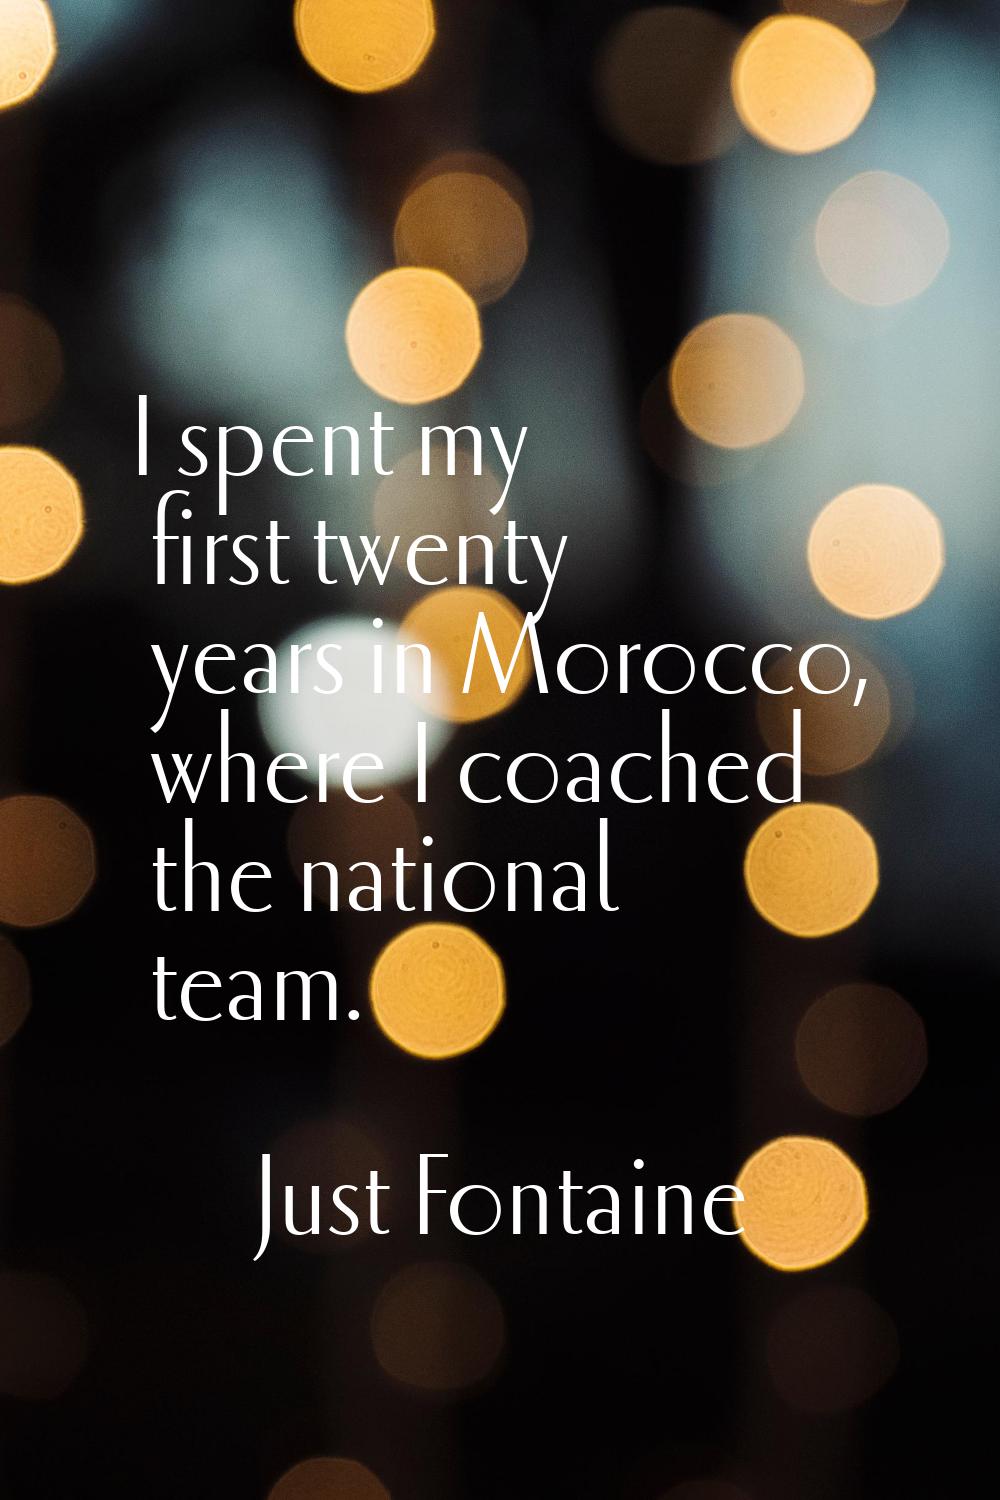 I spent my first twenty years in Morocco, where I coached the national team.